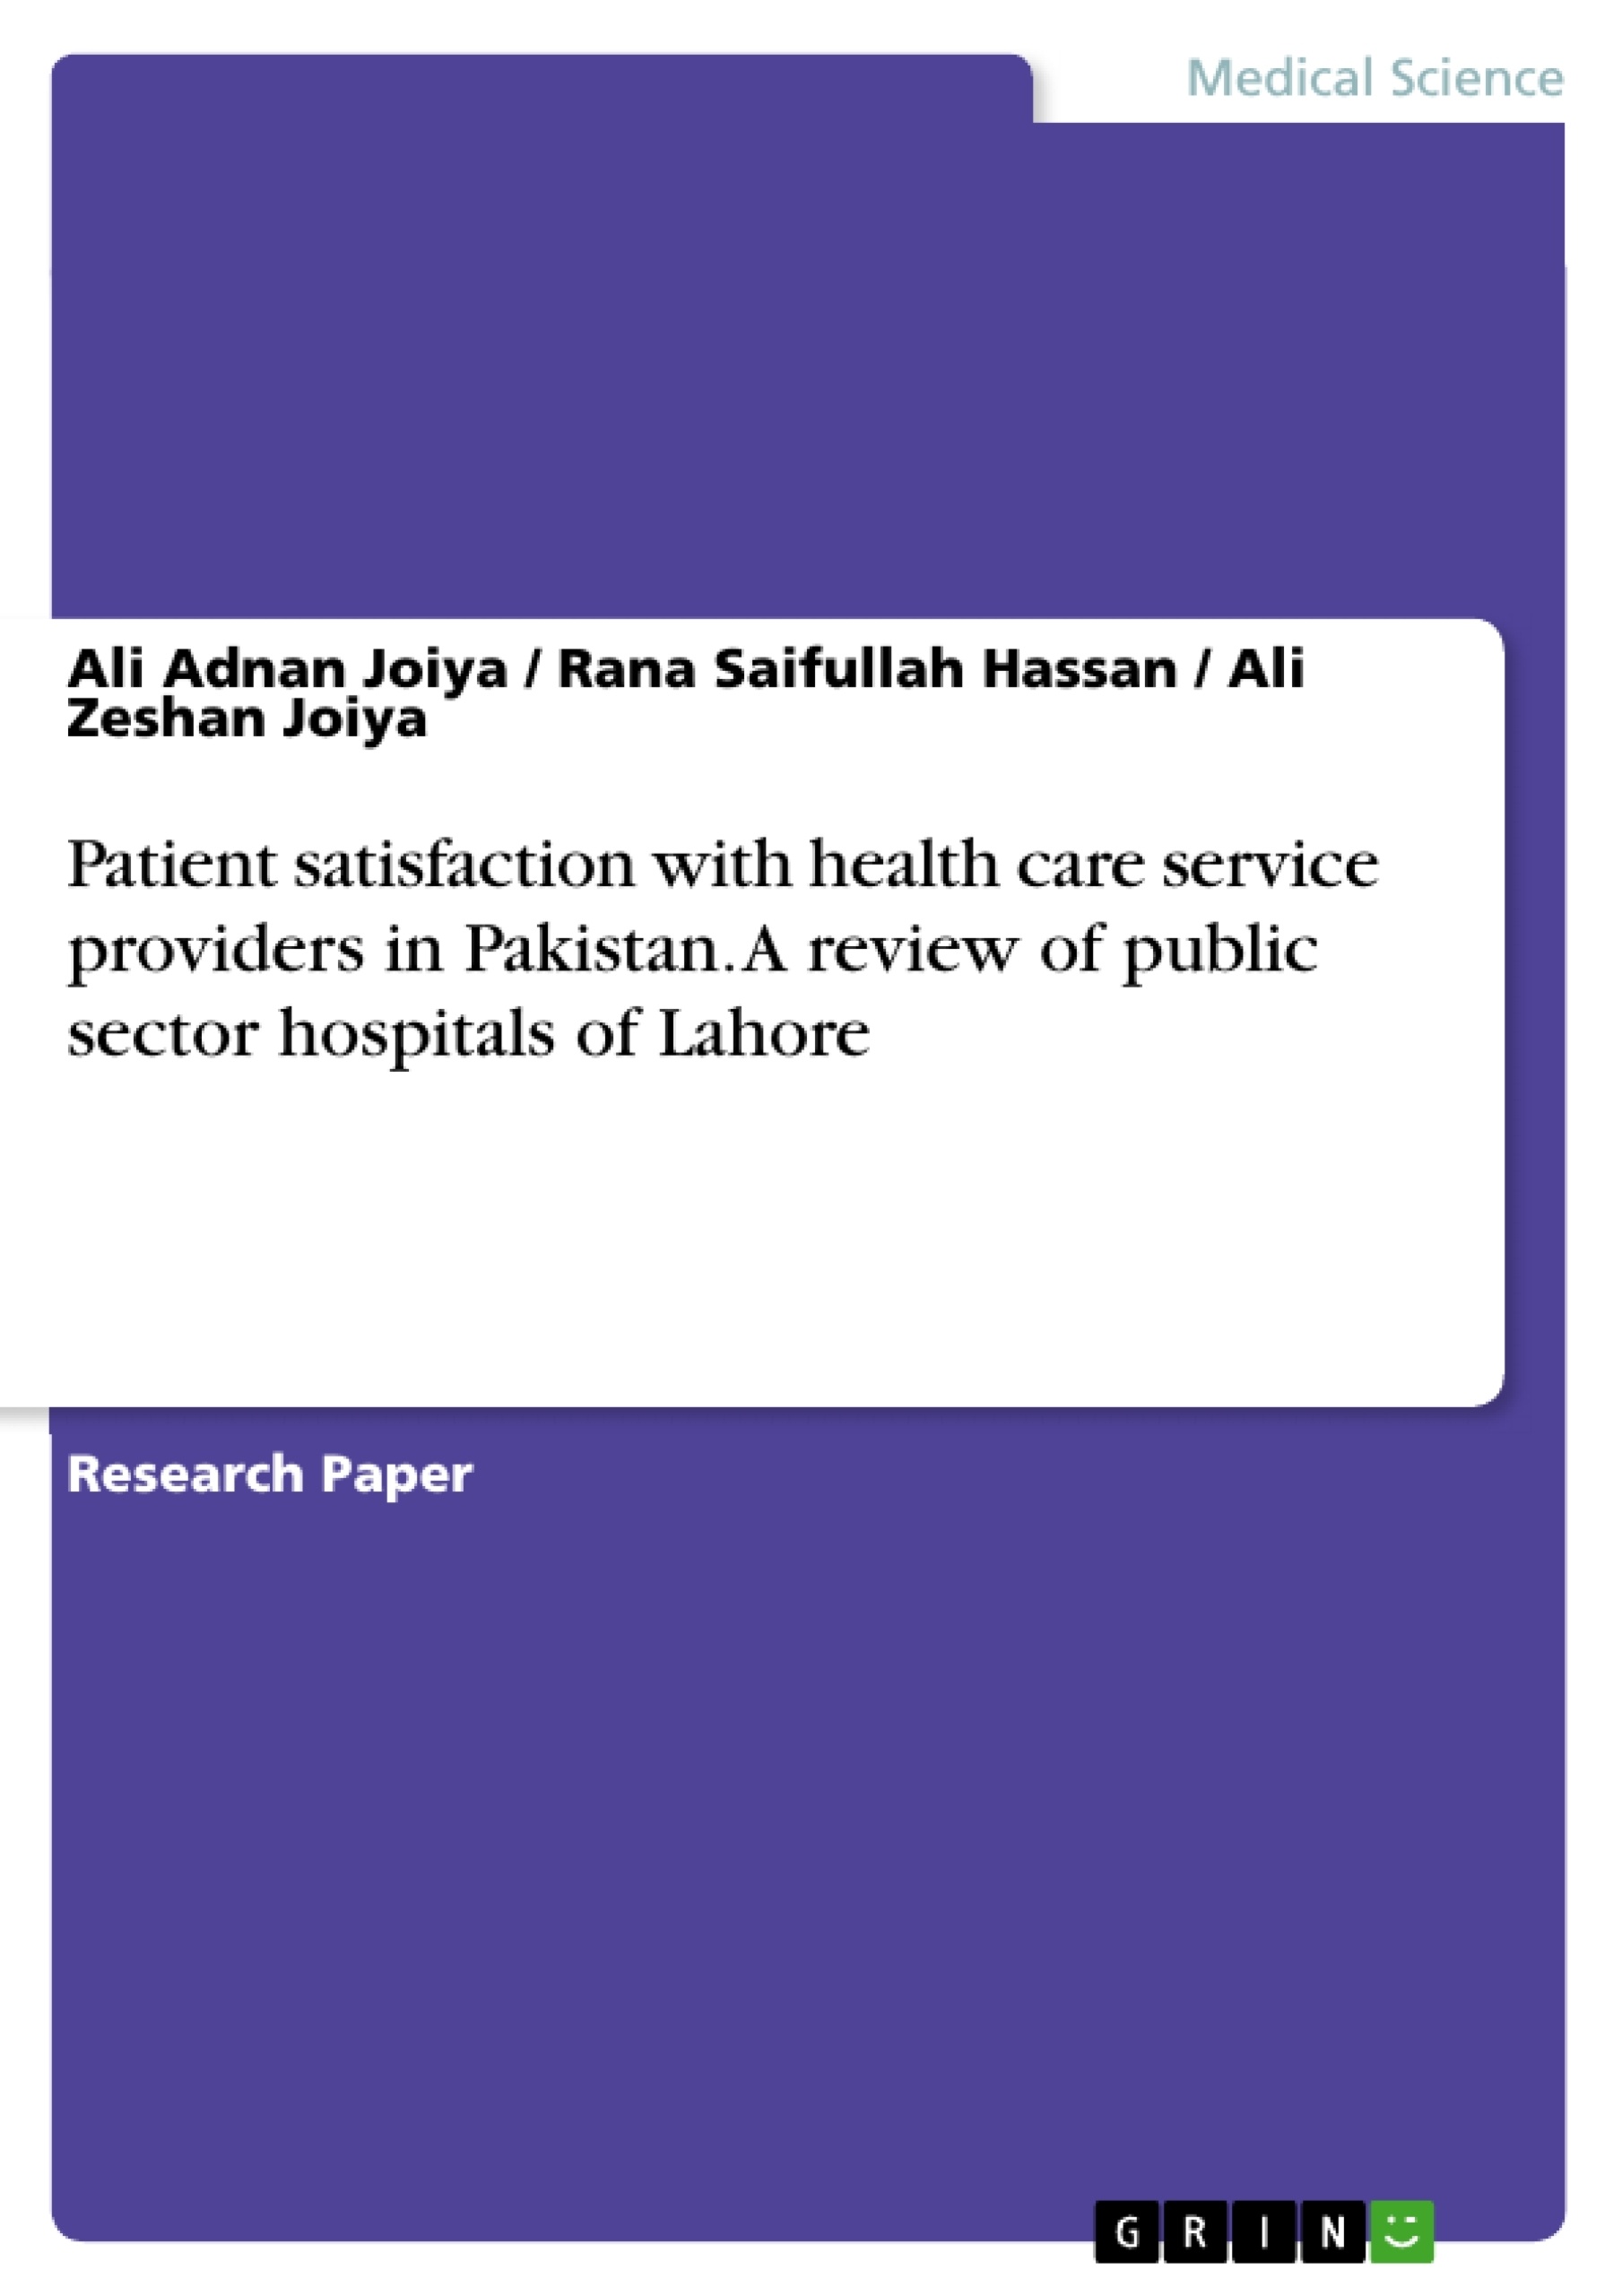 Titre: Patient satisfaction with health care service providers in Pakistan. A review of public sector hospitals of Lahore